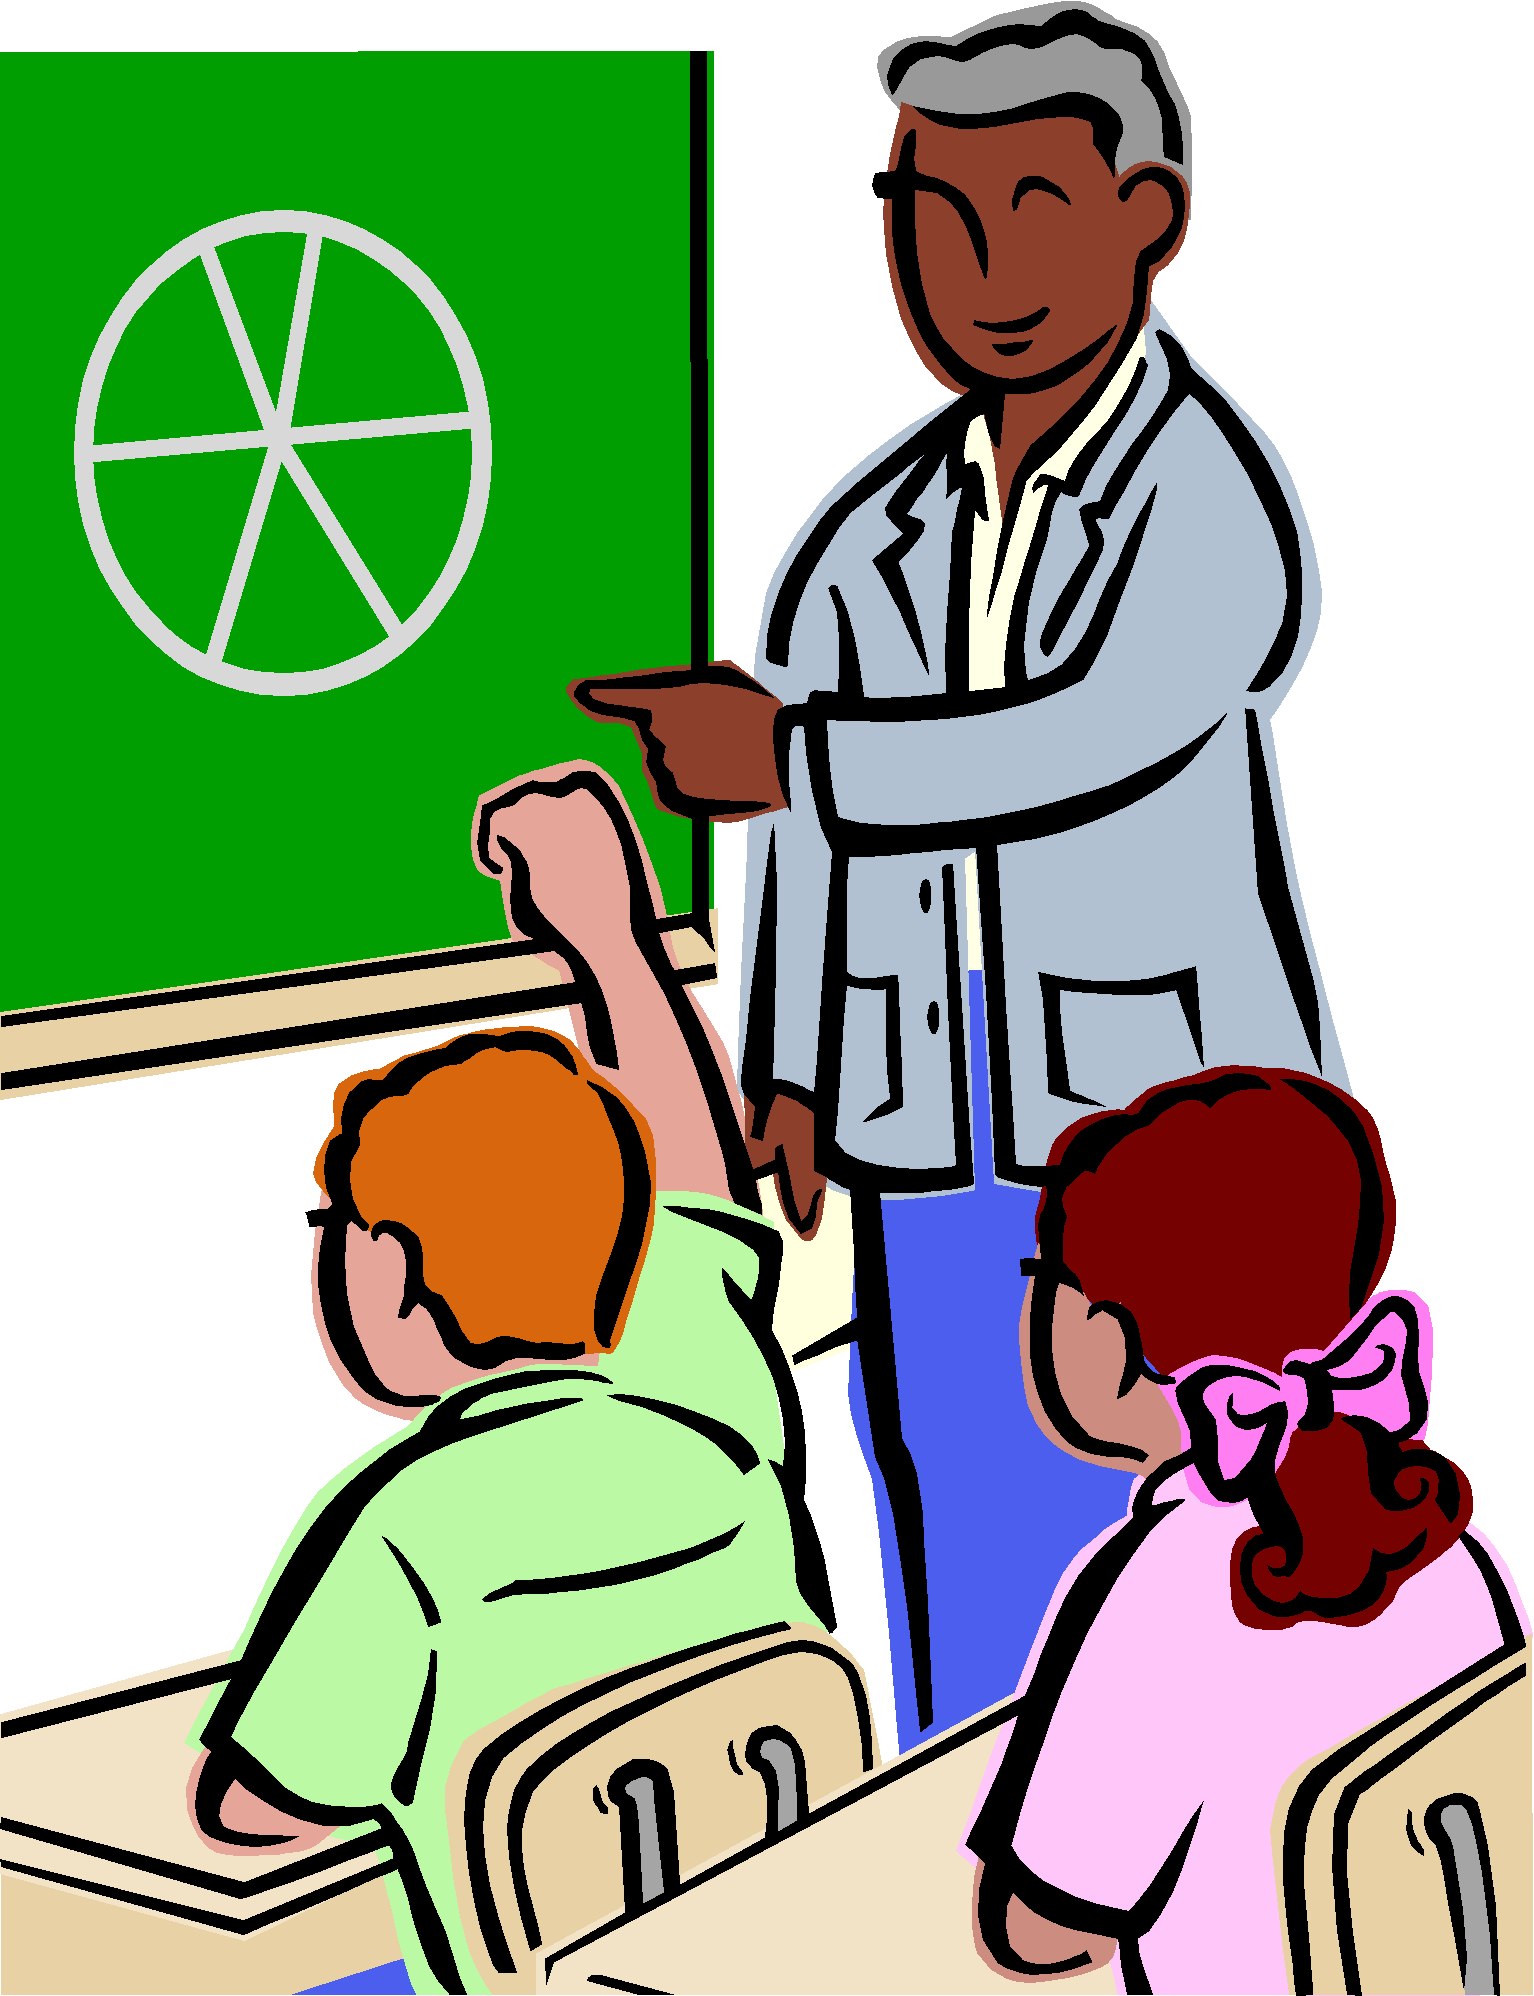 quality education clipart - photo #20